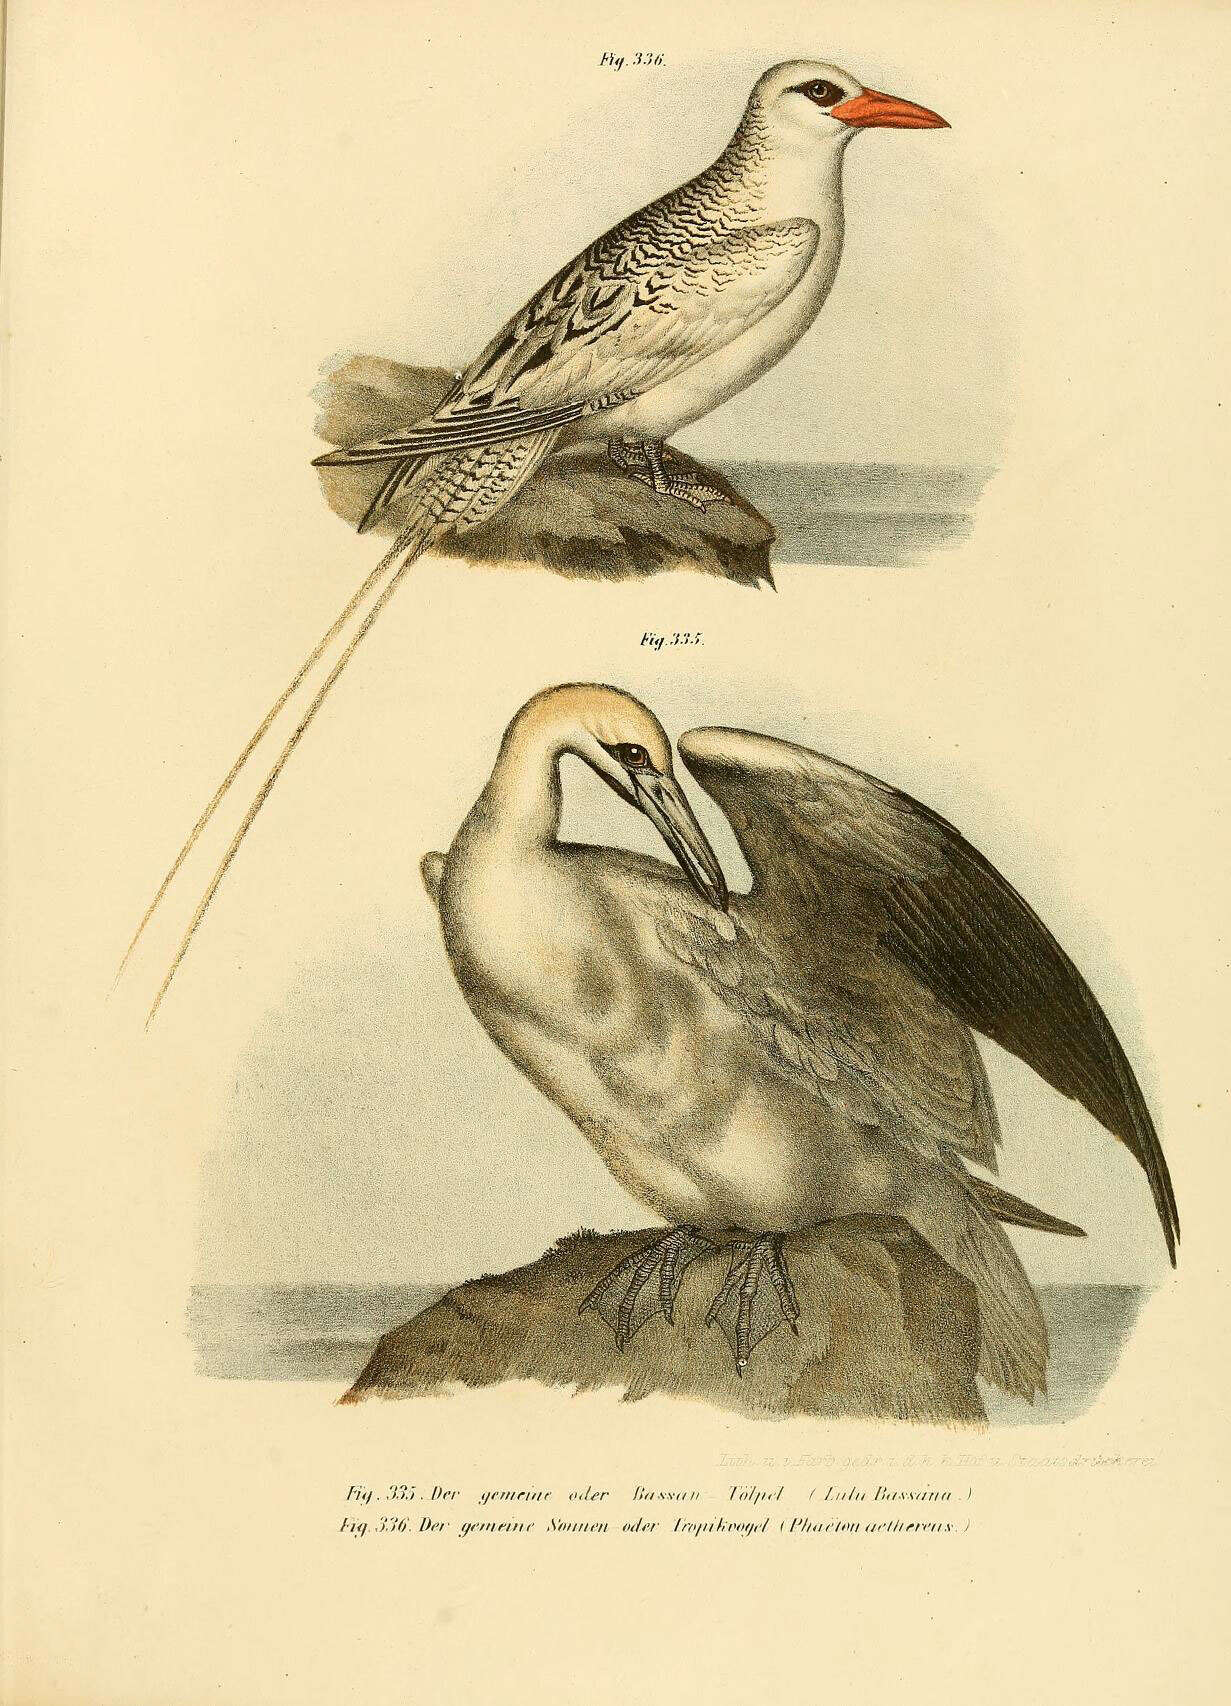 Image of Red-billed Tropicbird